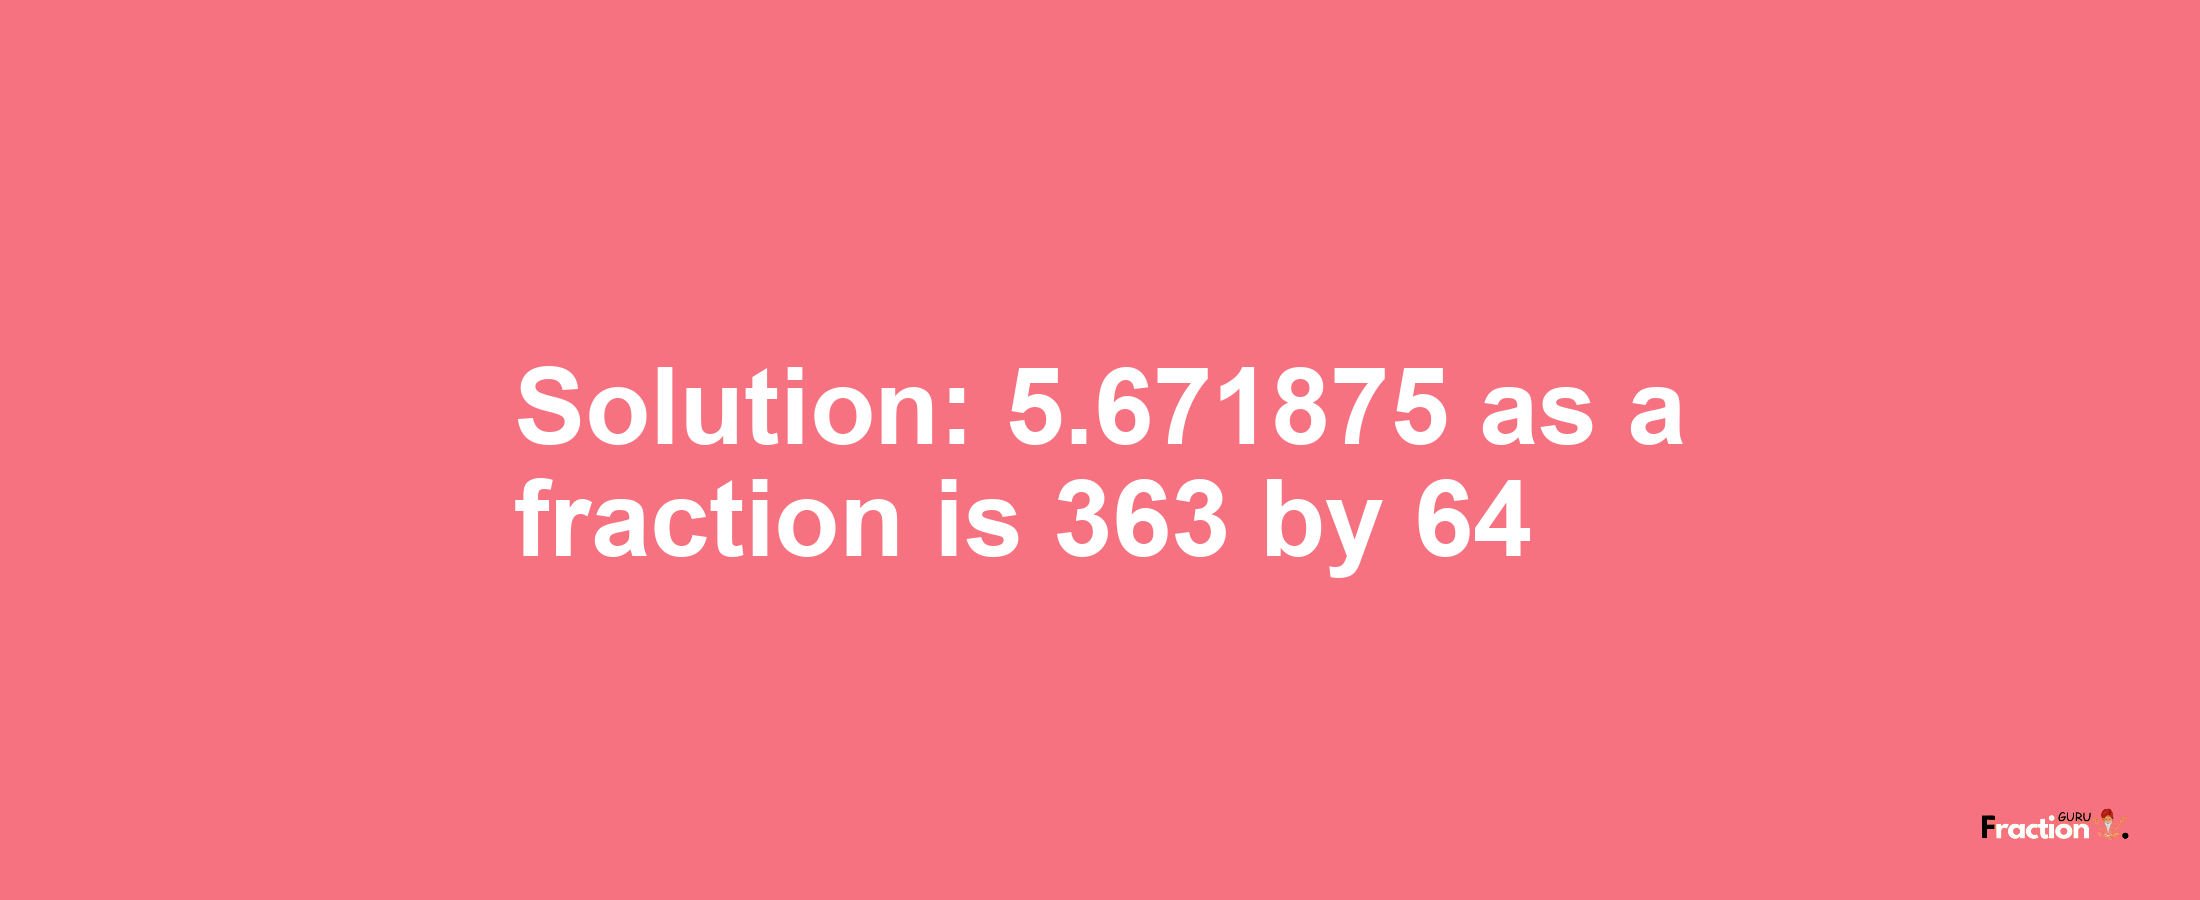 Solution:5.671875 as a fraction is 363/64